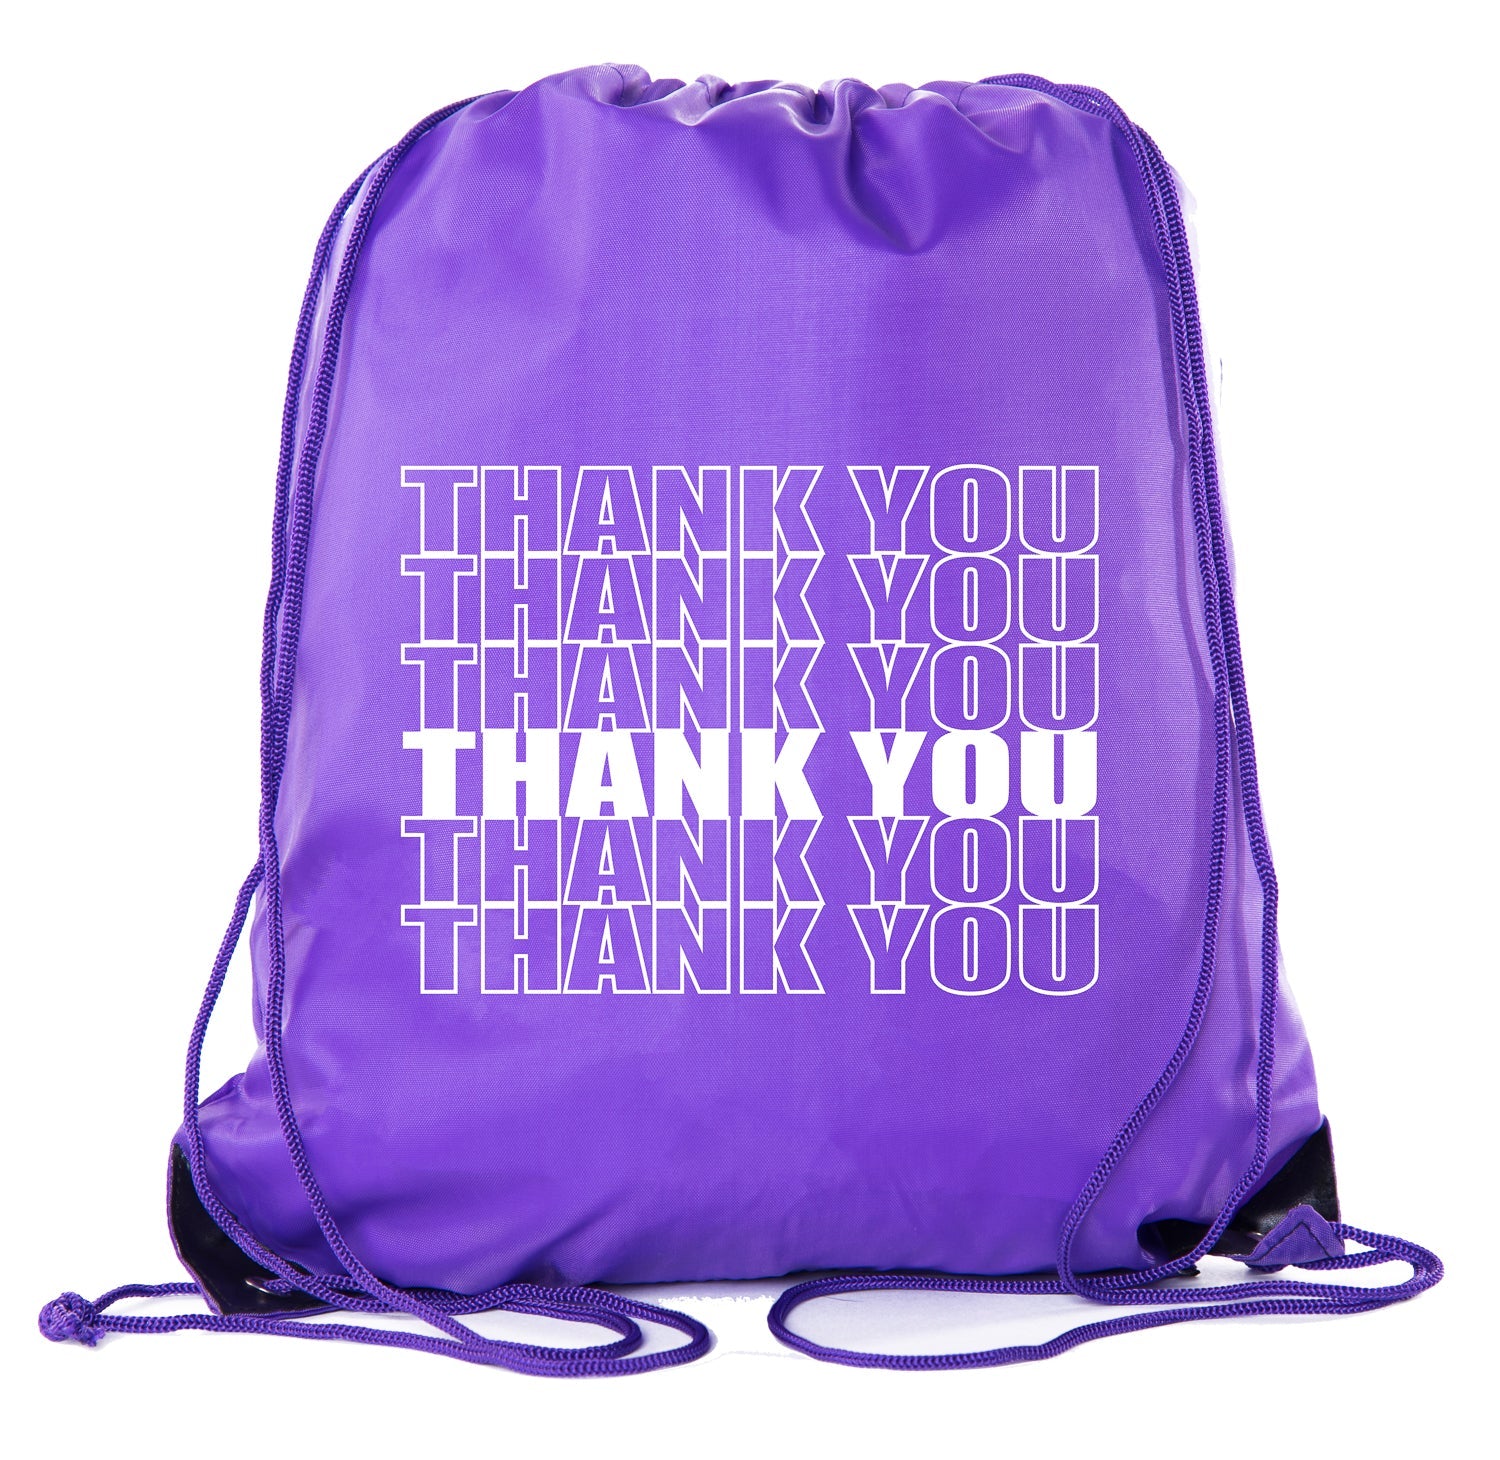 Thank You - Stacked Text - Polyester Drawstring Bag - Mato & Hash